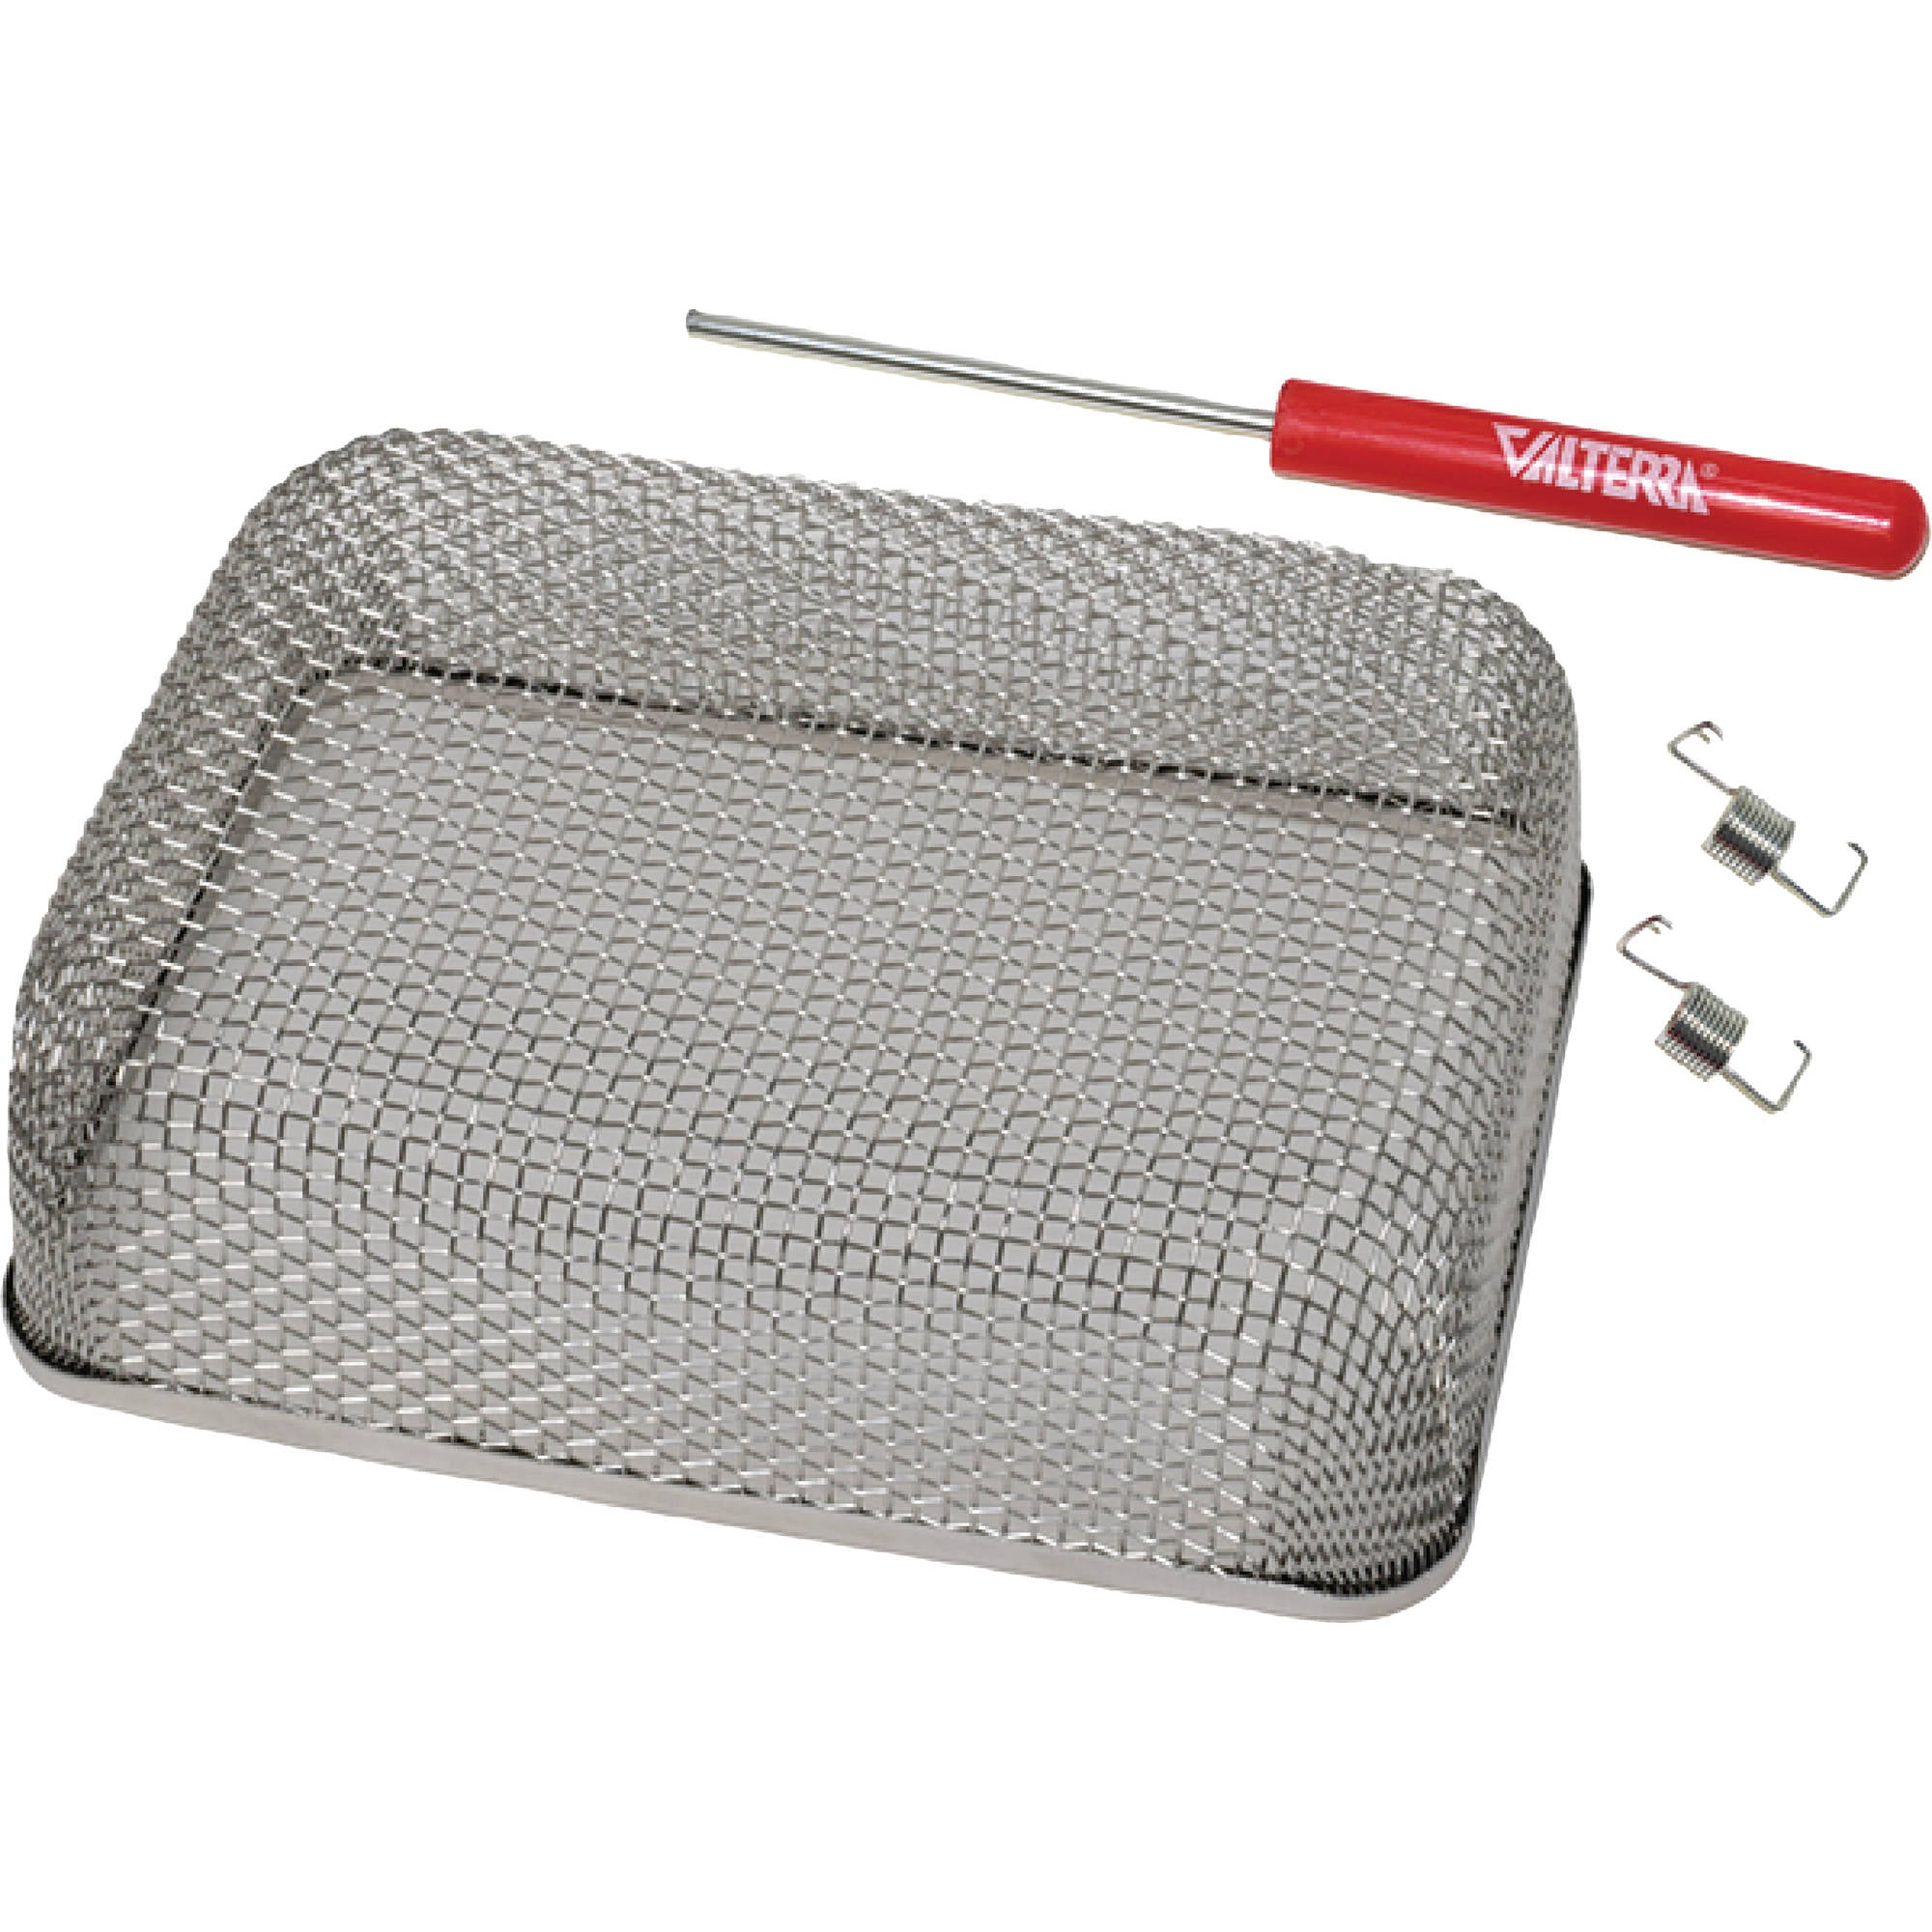 Valterra A101305VP Stainless Steel Mesh Cover Bug Screen for RV Furnace Vent & Includes